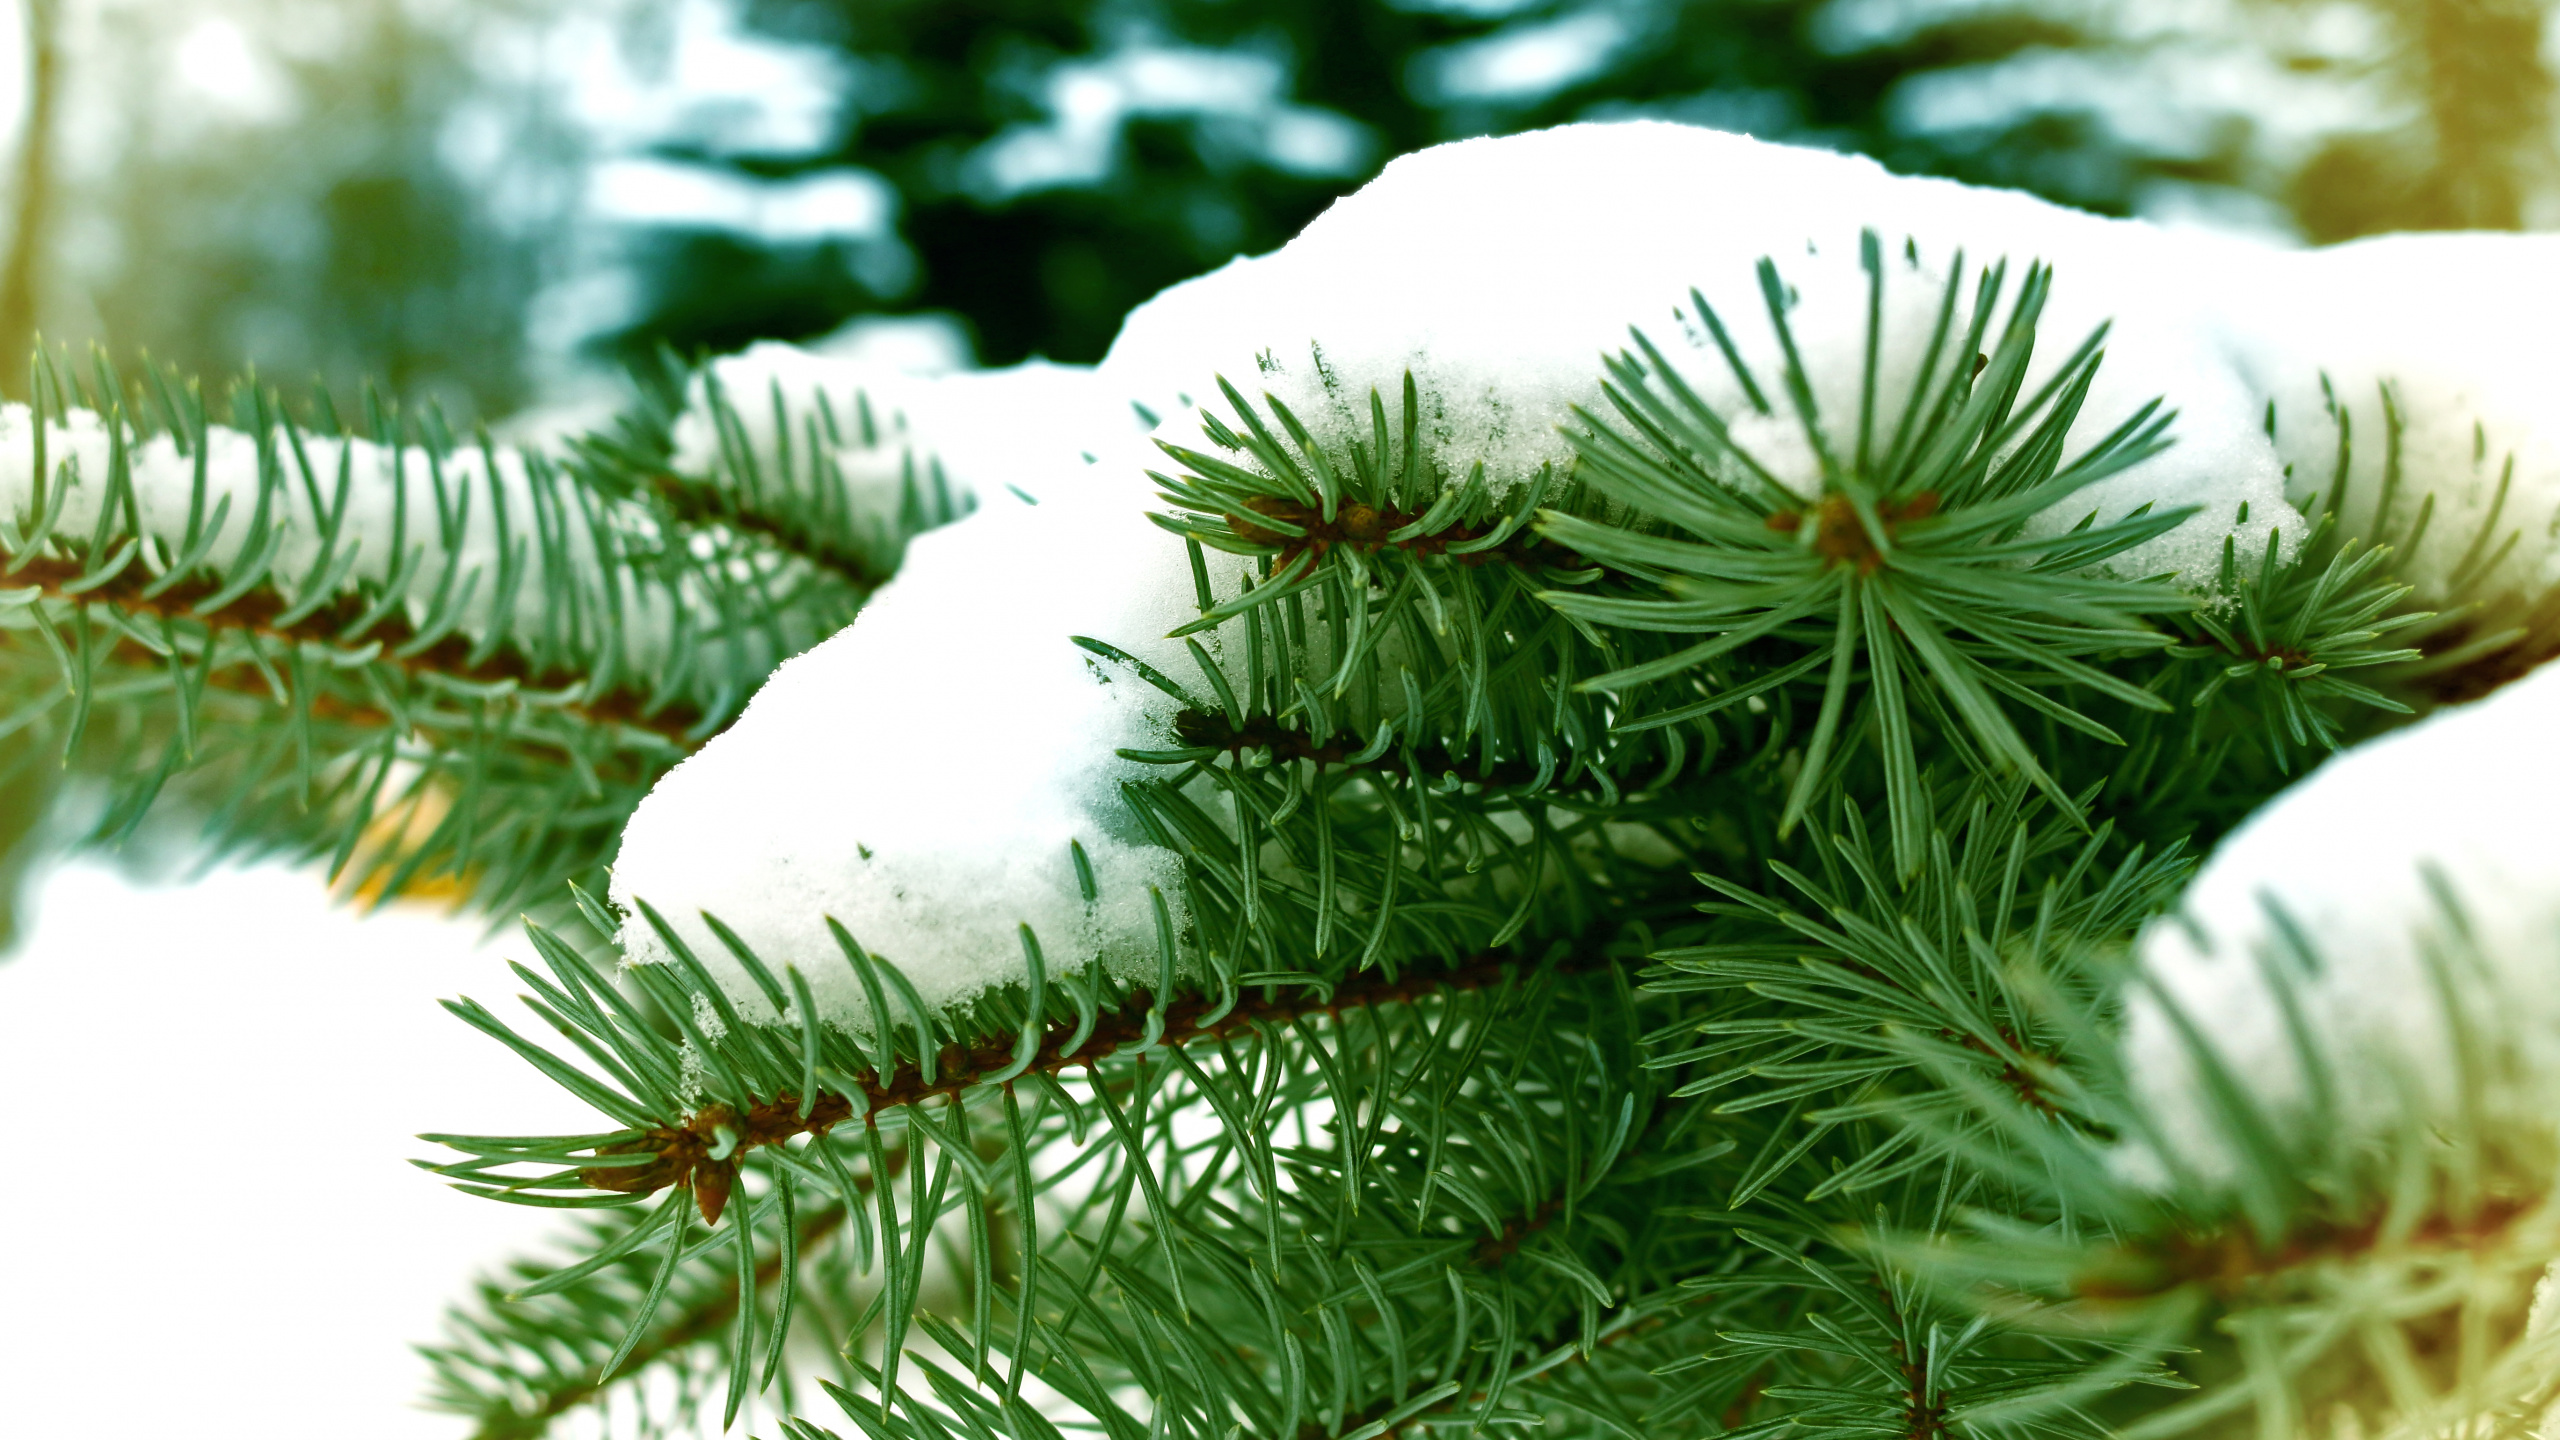 Green Pine Tree Covered With Snow. Wallpaper in 2560x1440 Resolution